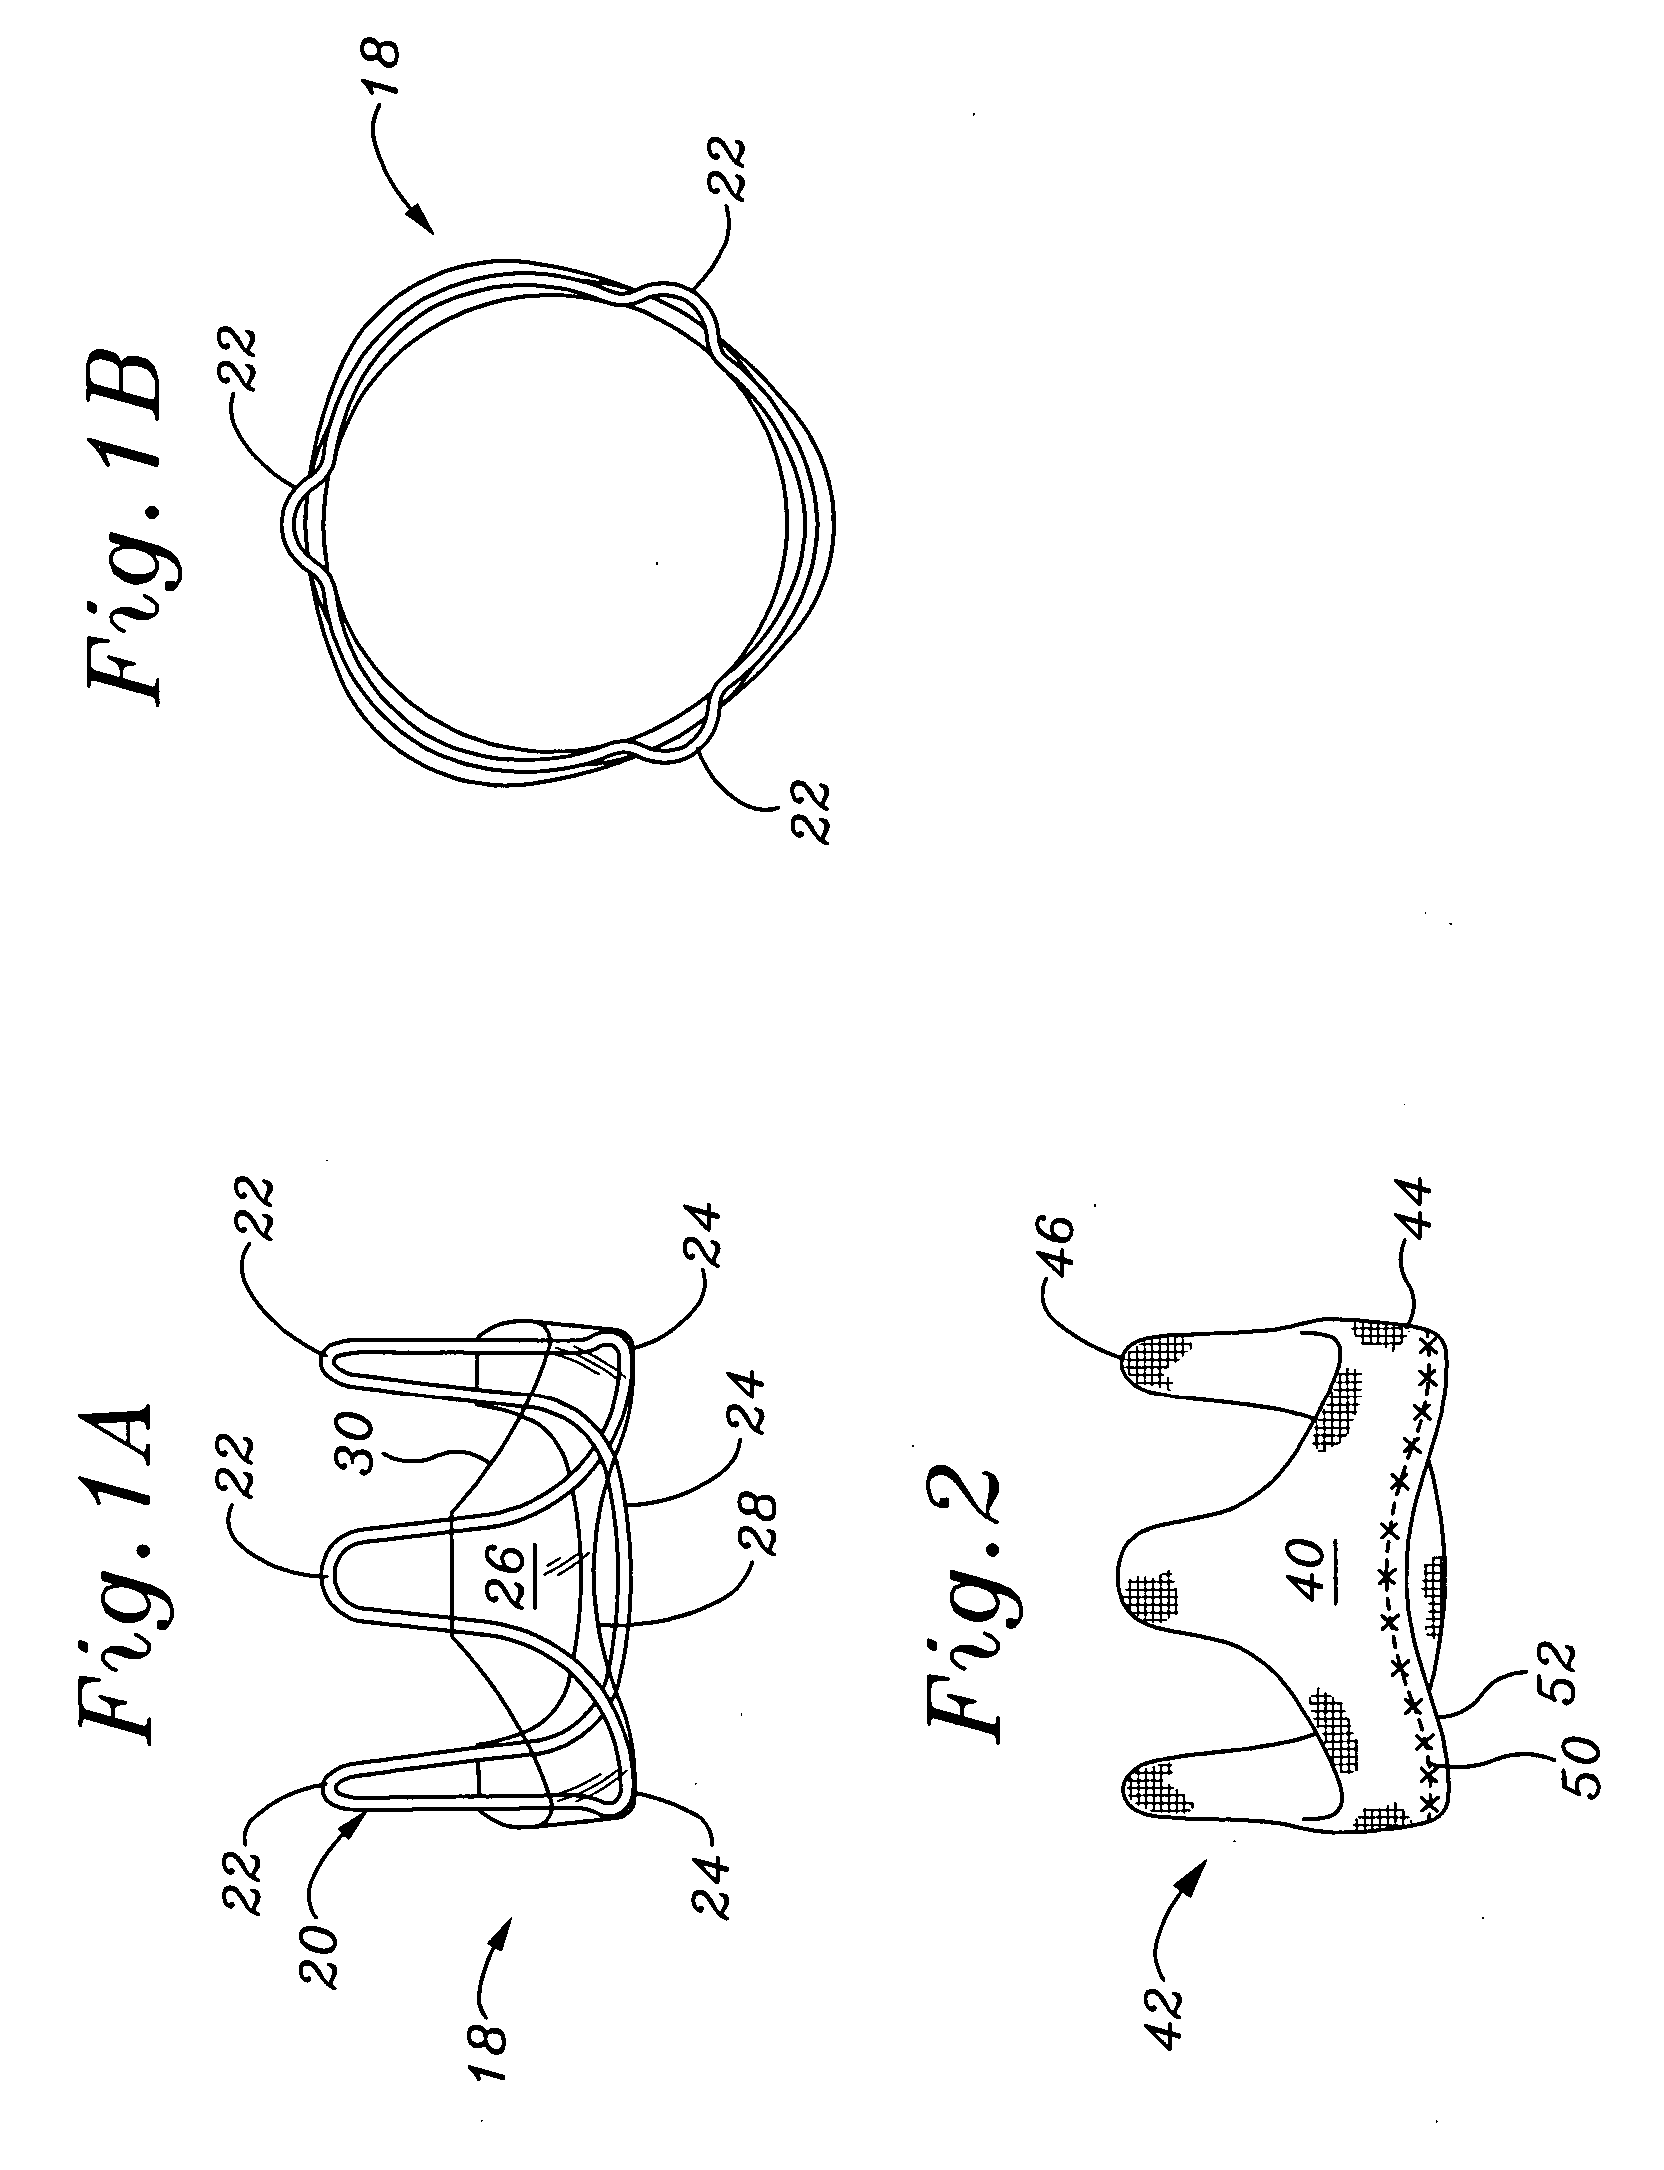 Systems and methods for assembling components of a fabric-covered prosthetic heart valve